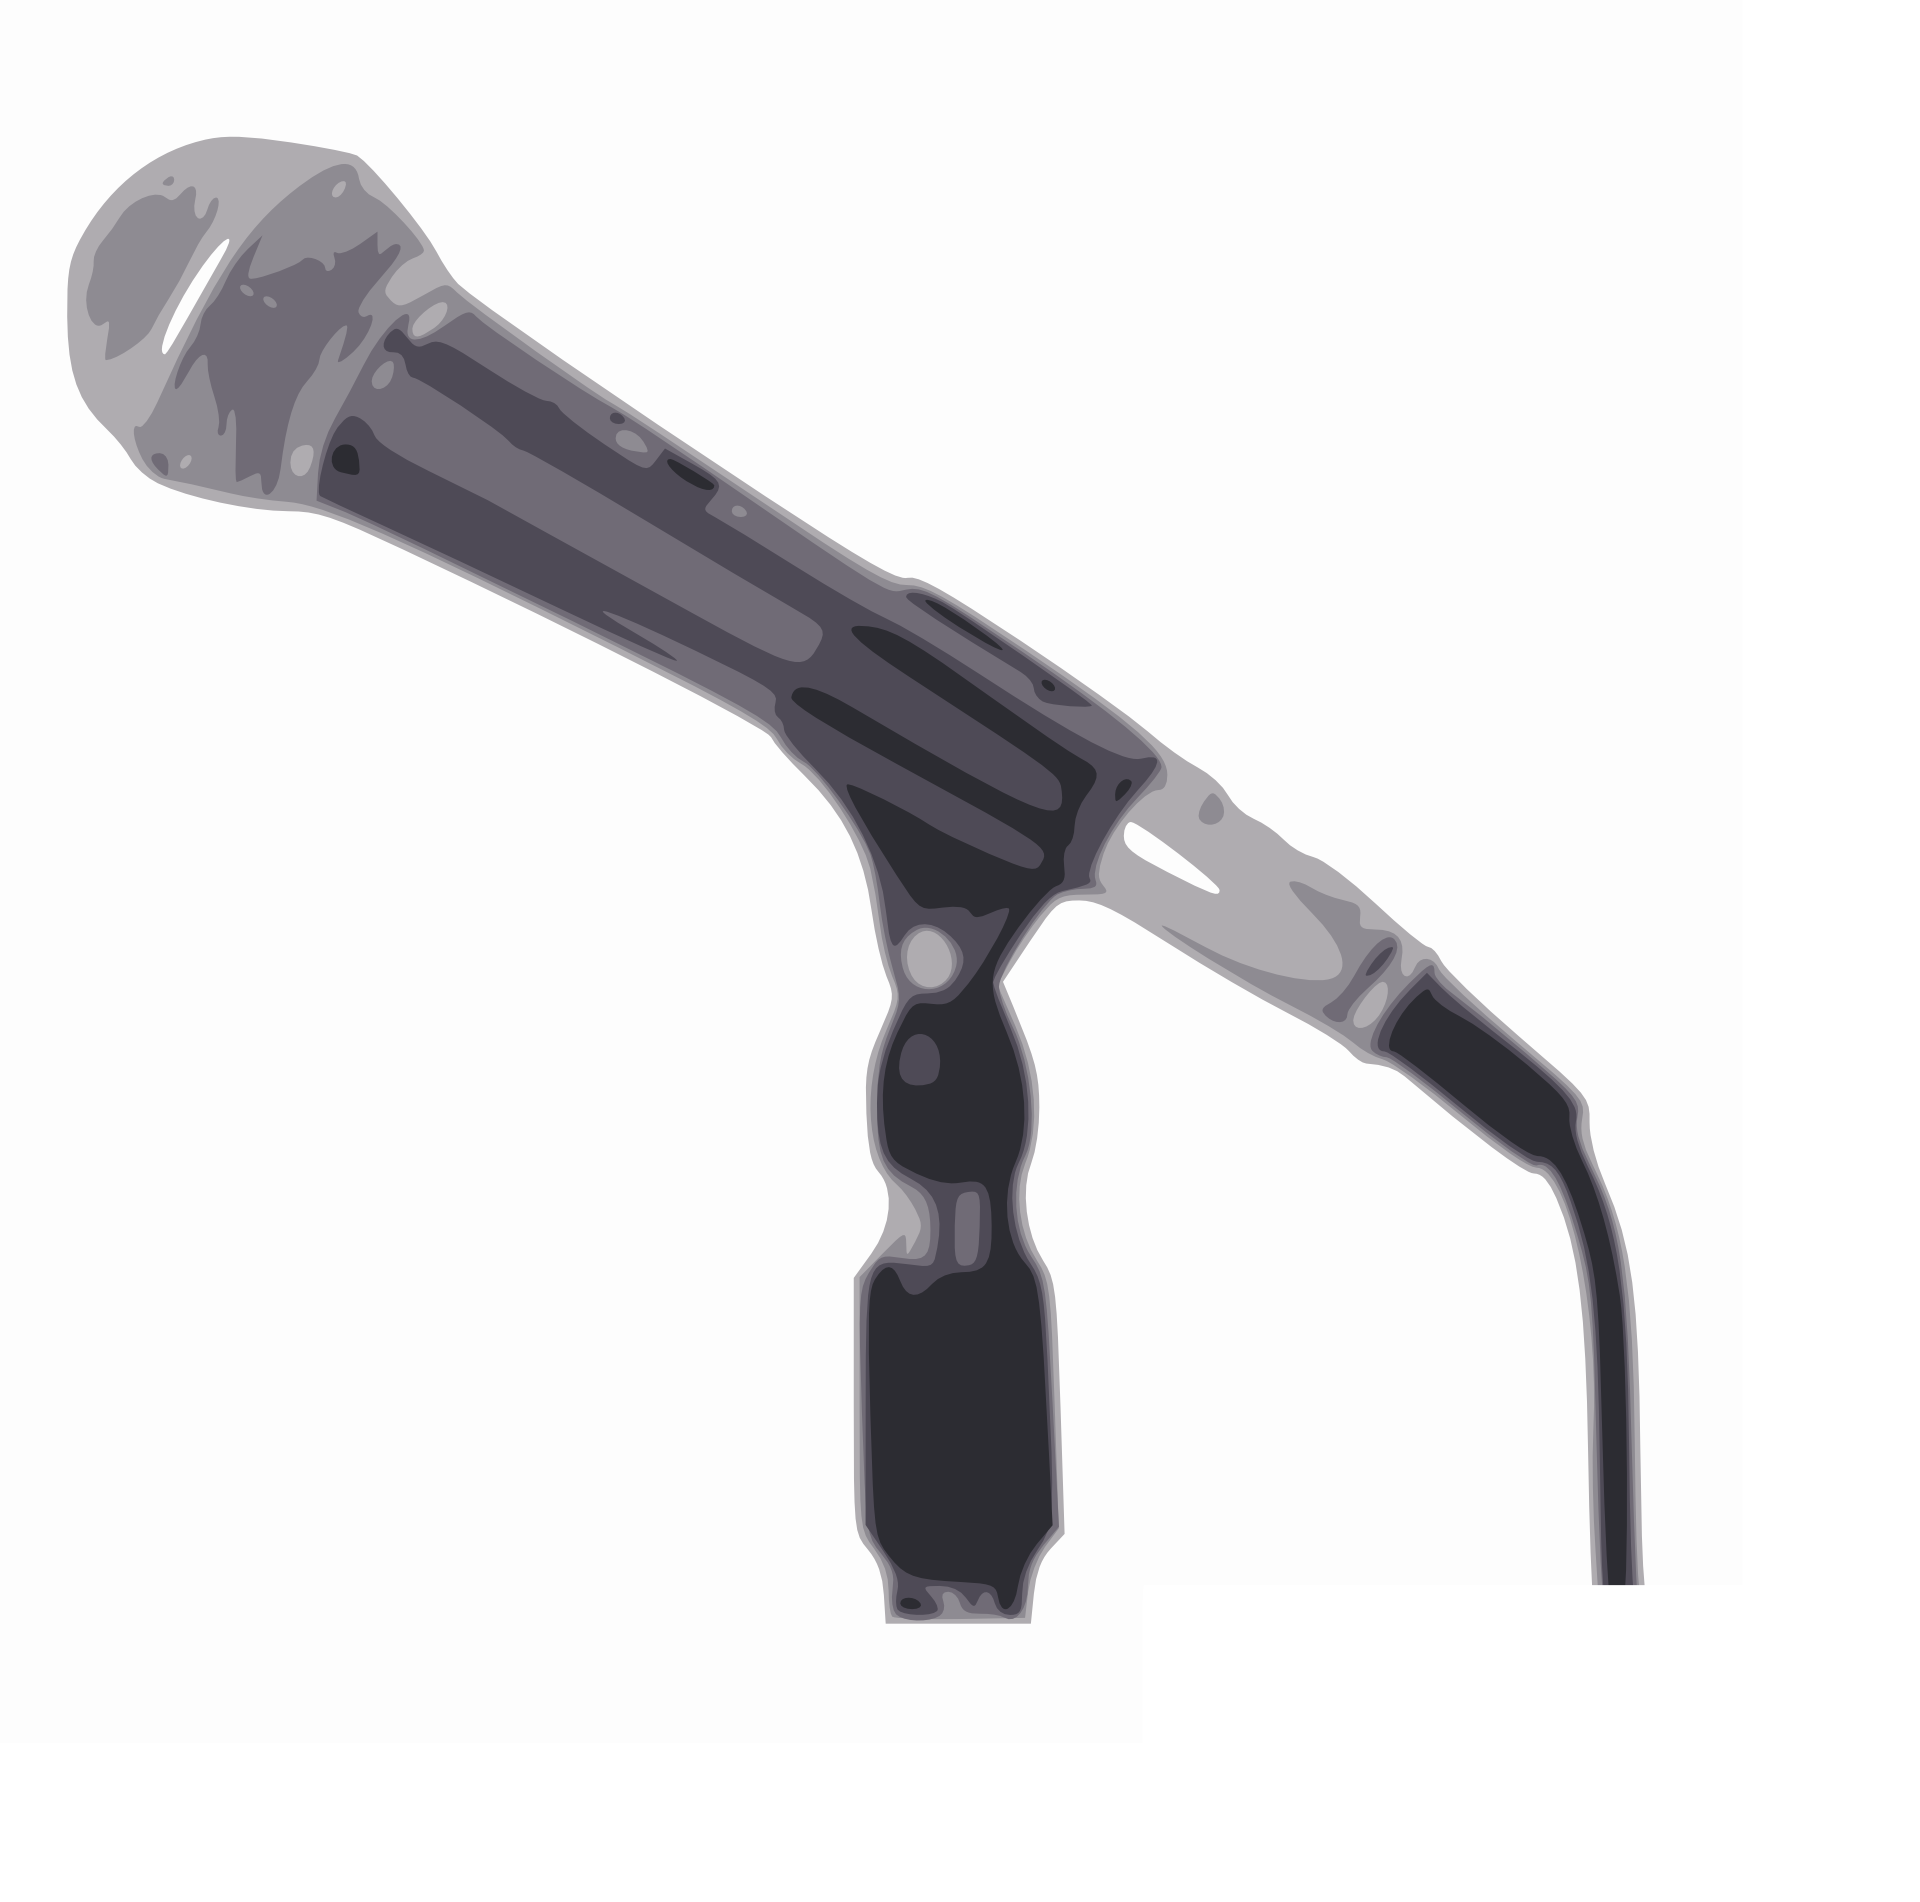 Stand microphone as a drawing free image download